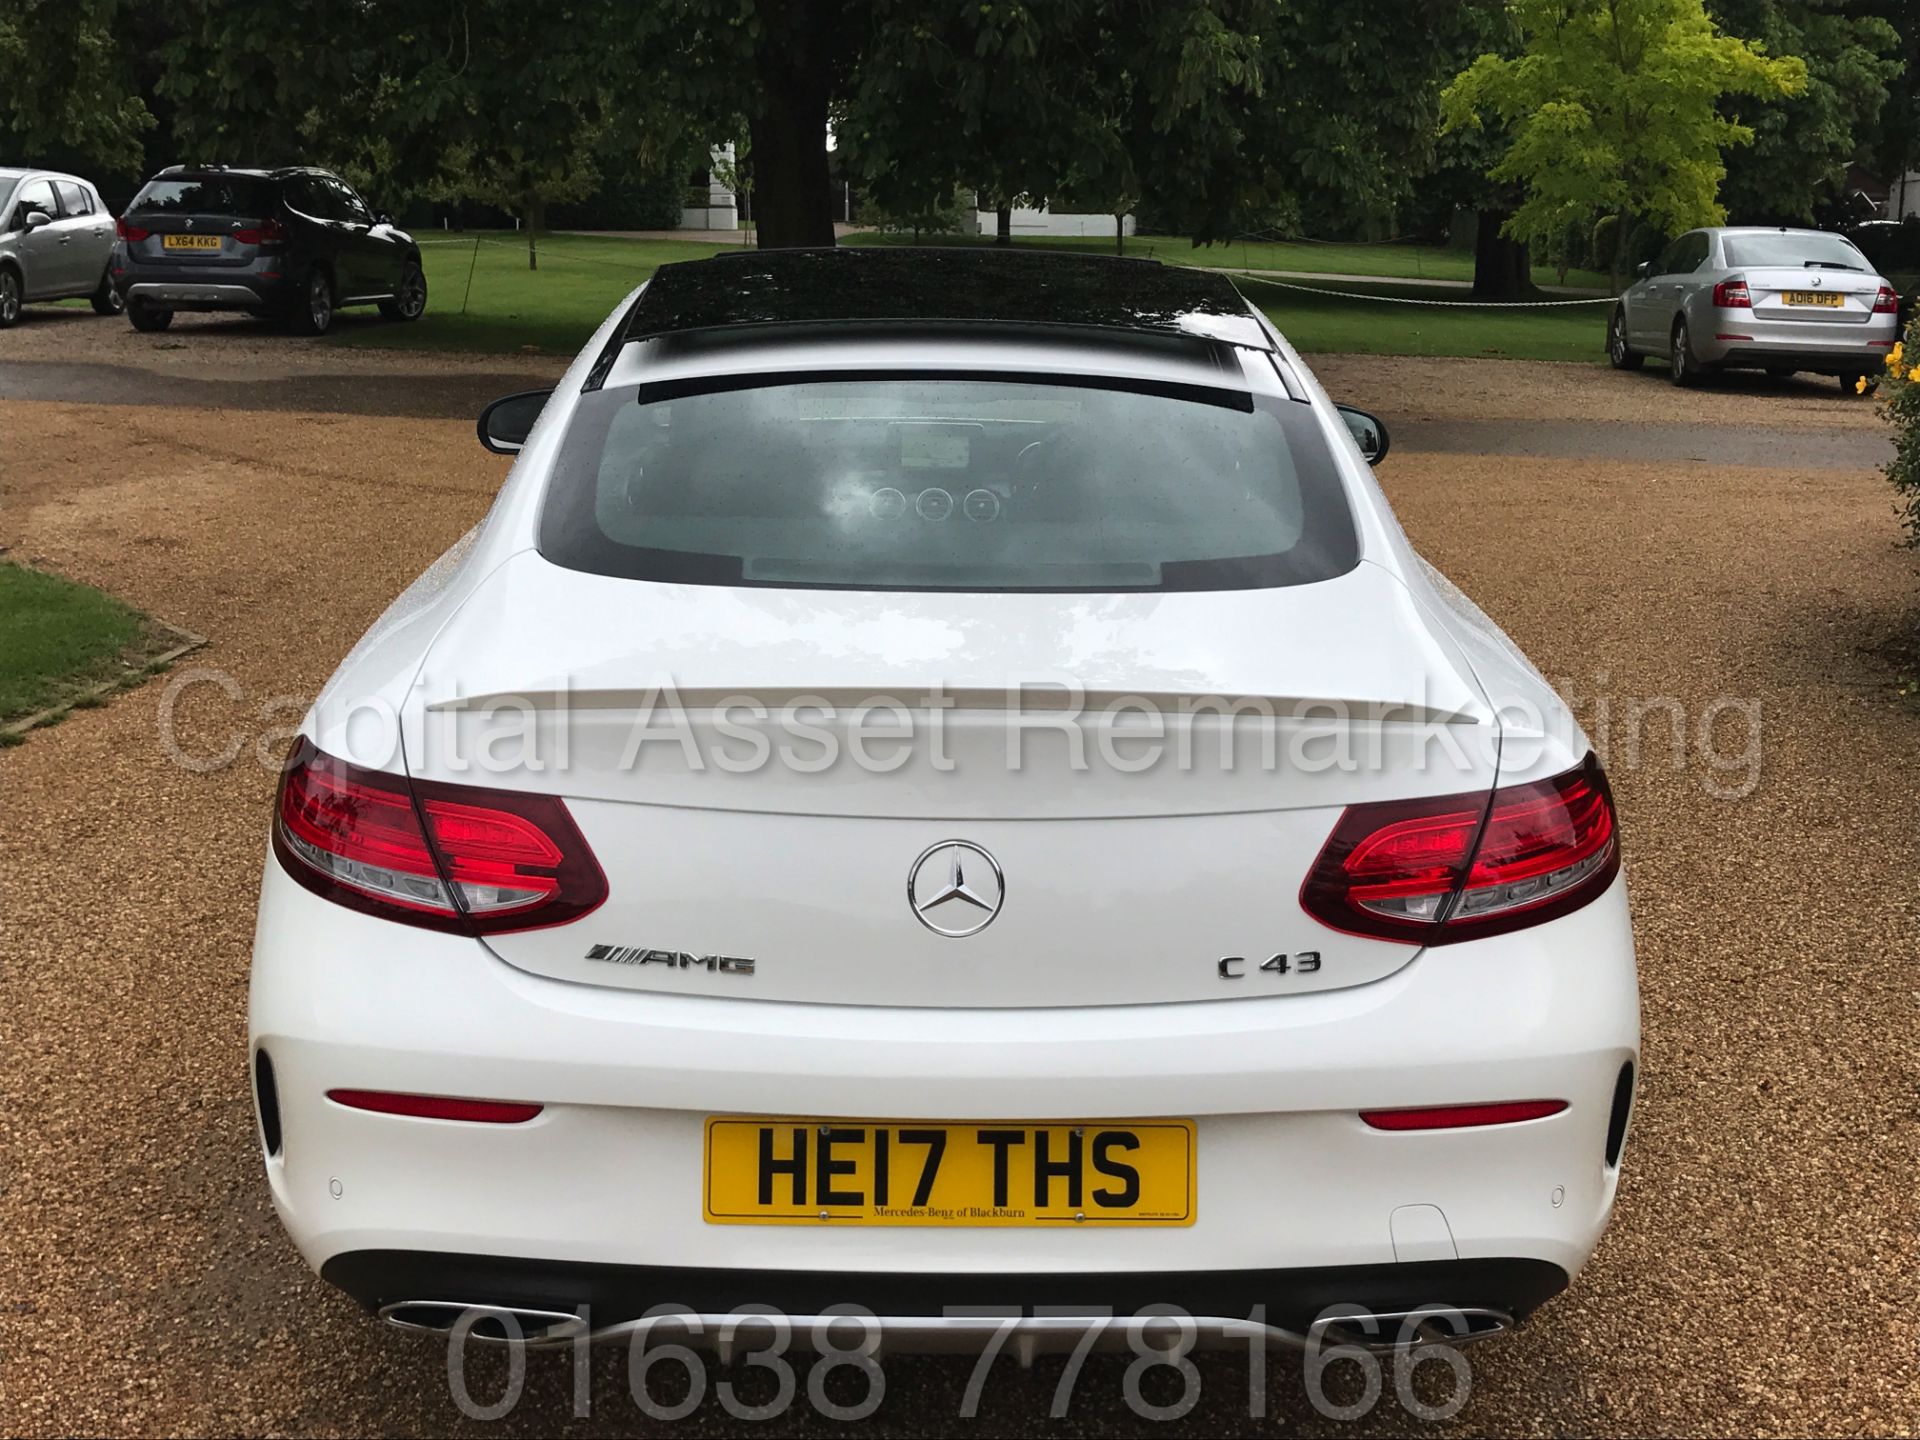 MEREDES-BENZ C43 AMG PREMIUM '4 MATIC' COUPE (2017) '9-G AUTO - LEATHER - SAT NAV' **FULLY LOADED** - Image 14 of 57